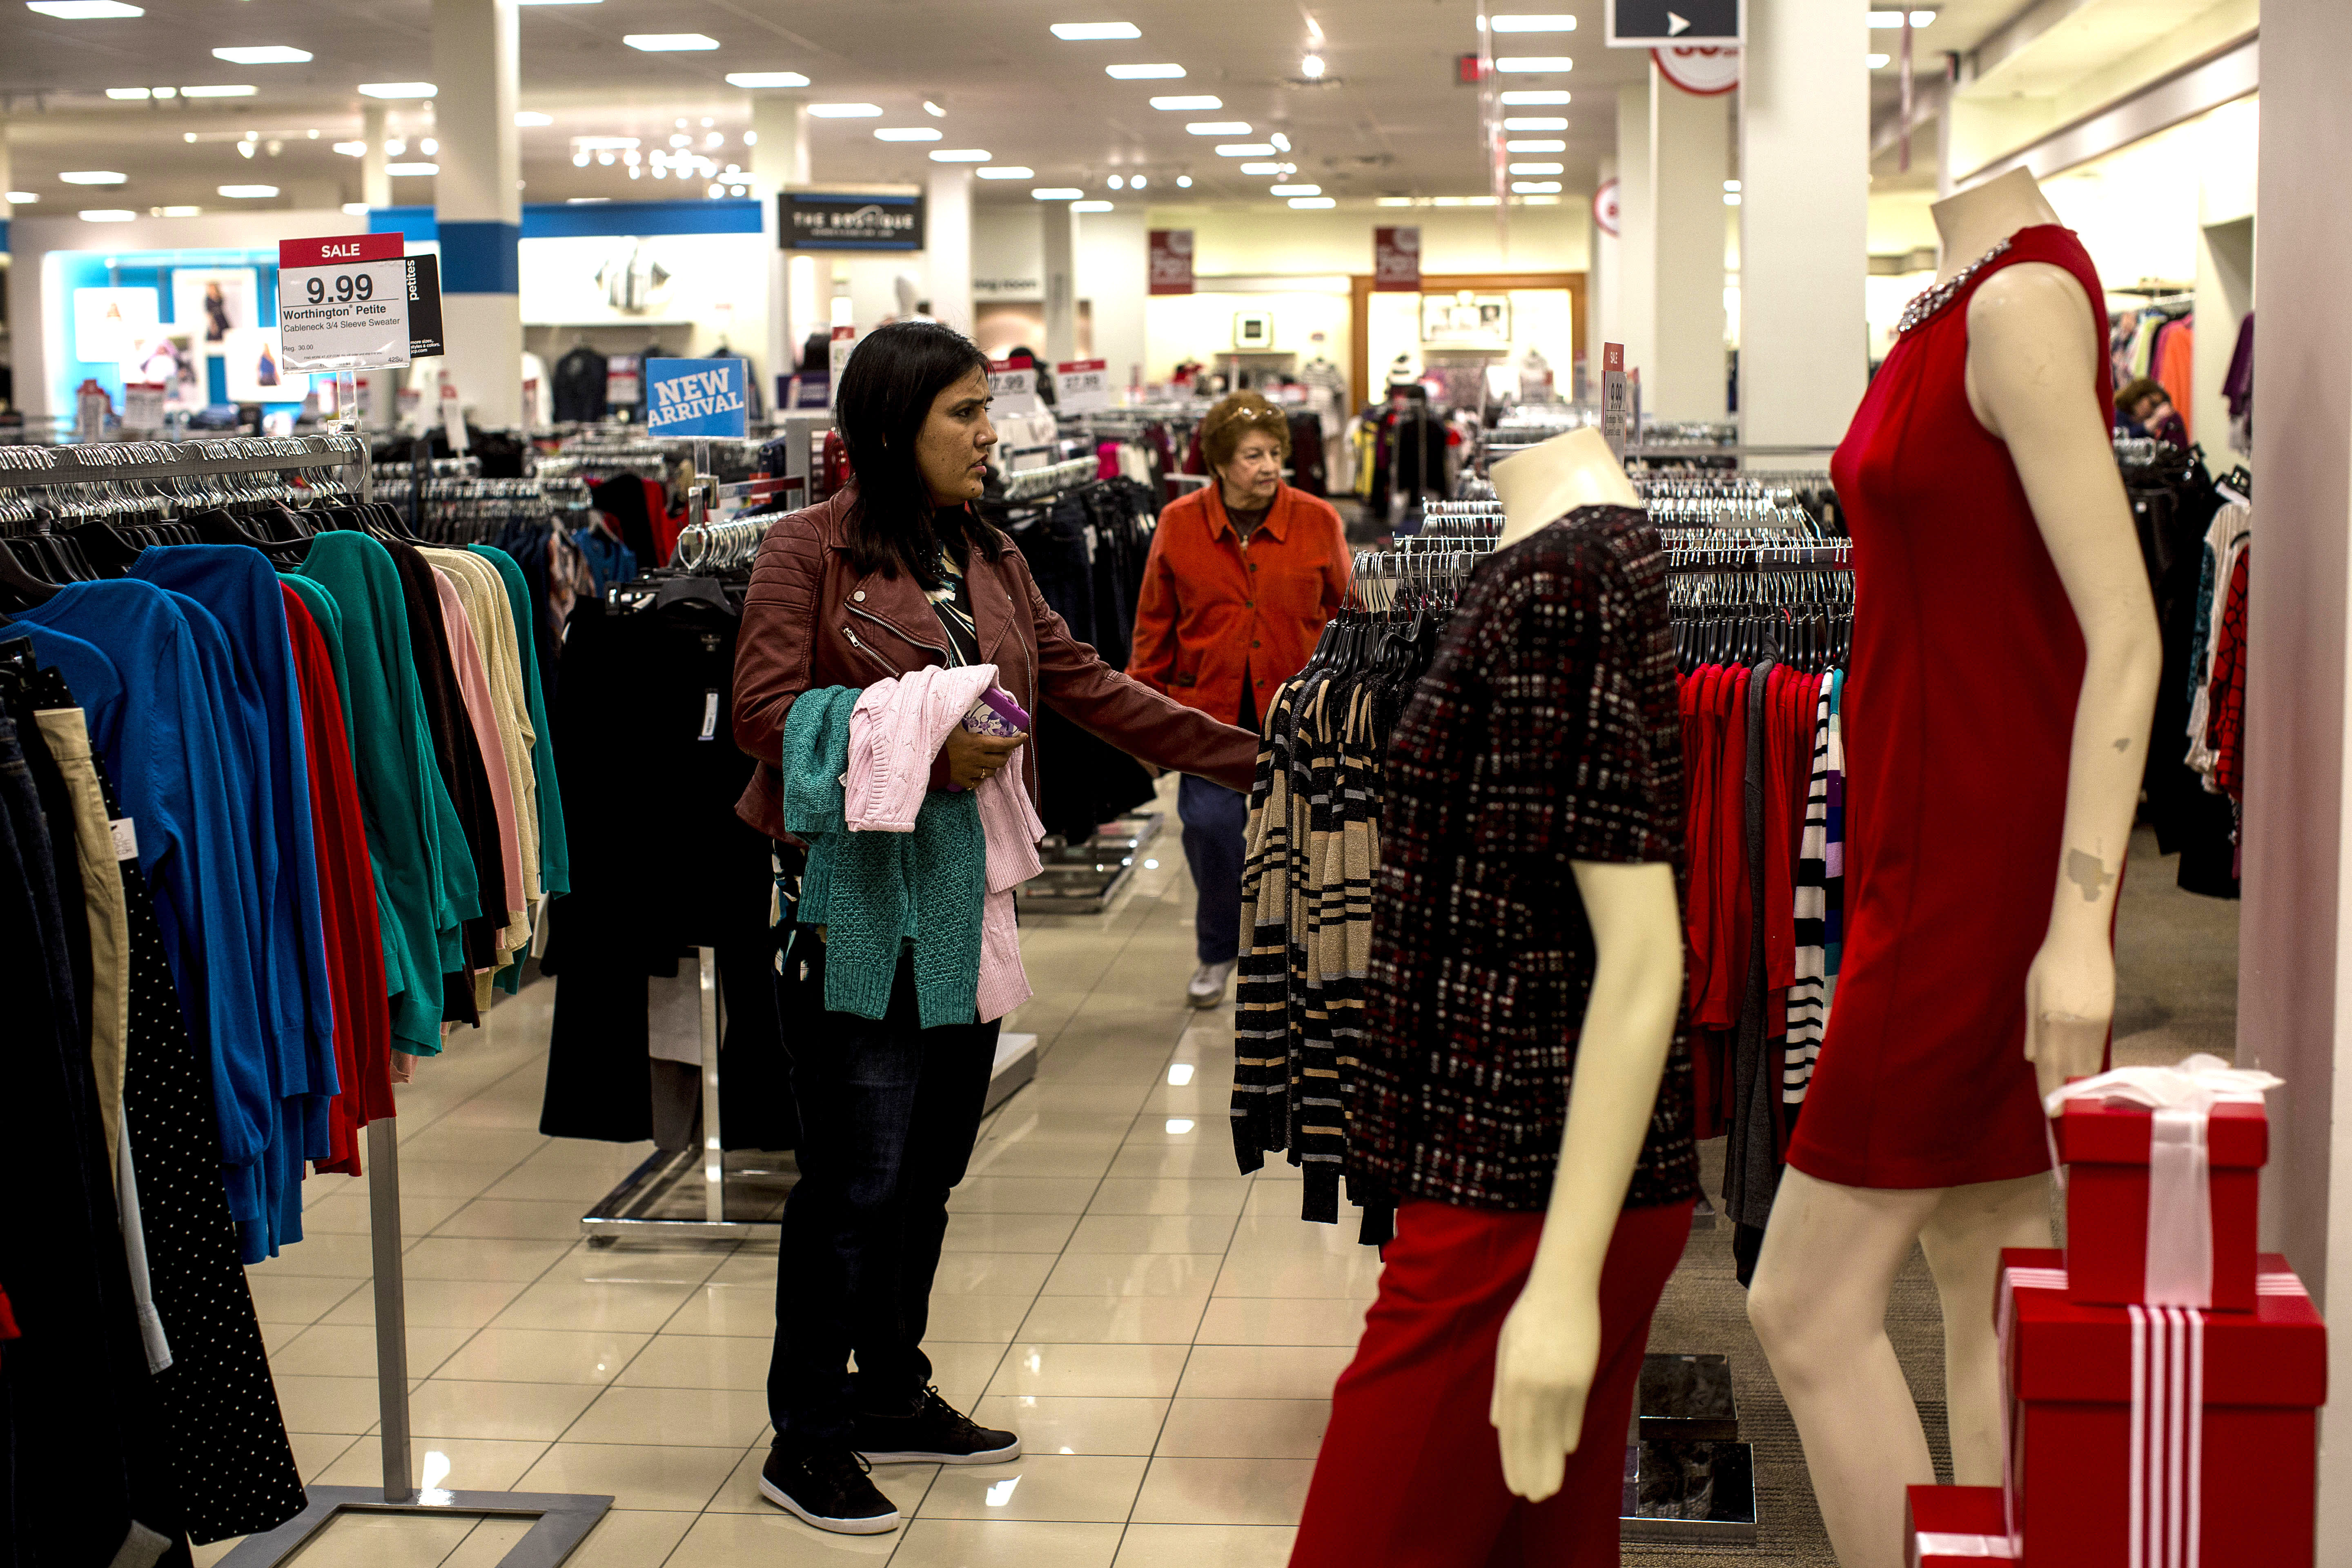 Apparel sales just had their worst month in over 10 years. Here's why